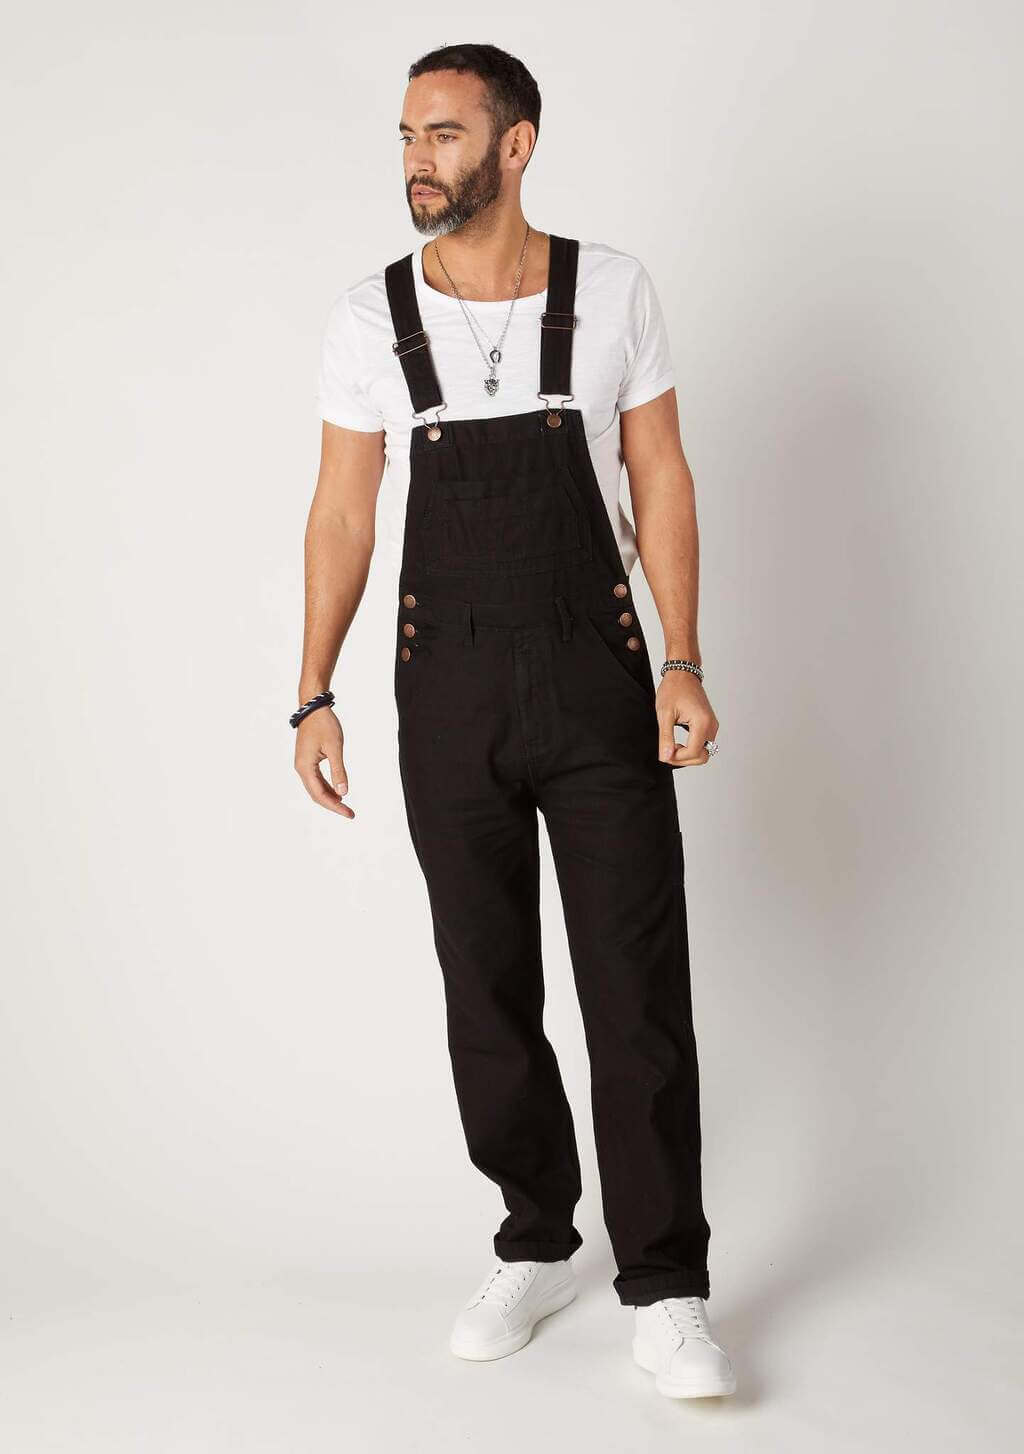 Overalls Outfit for 90s theme party 